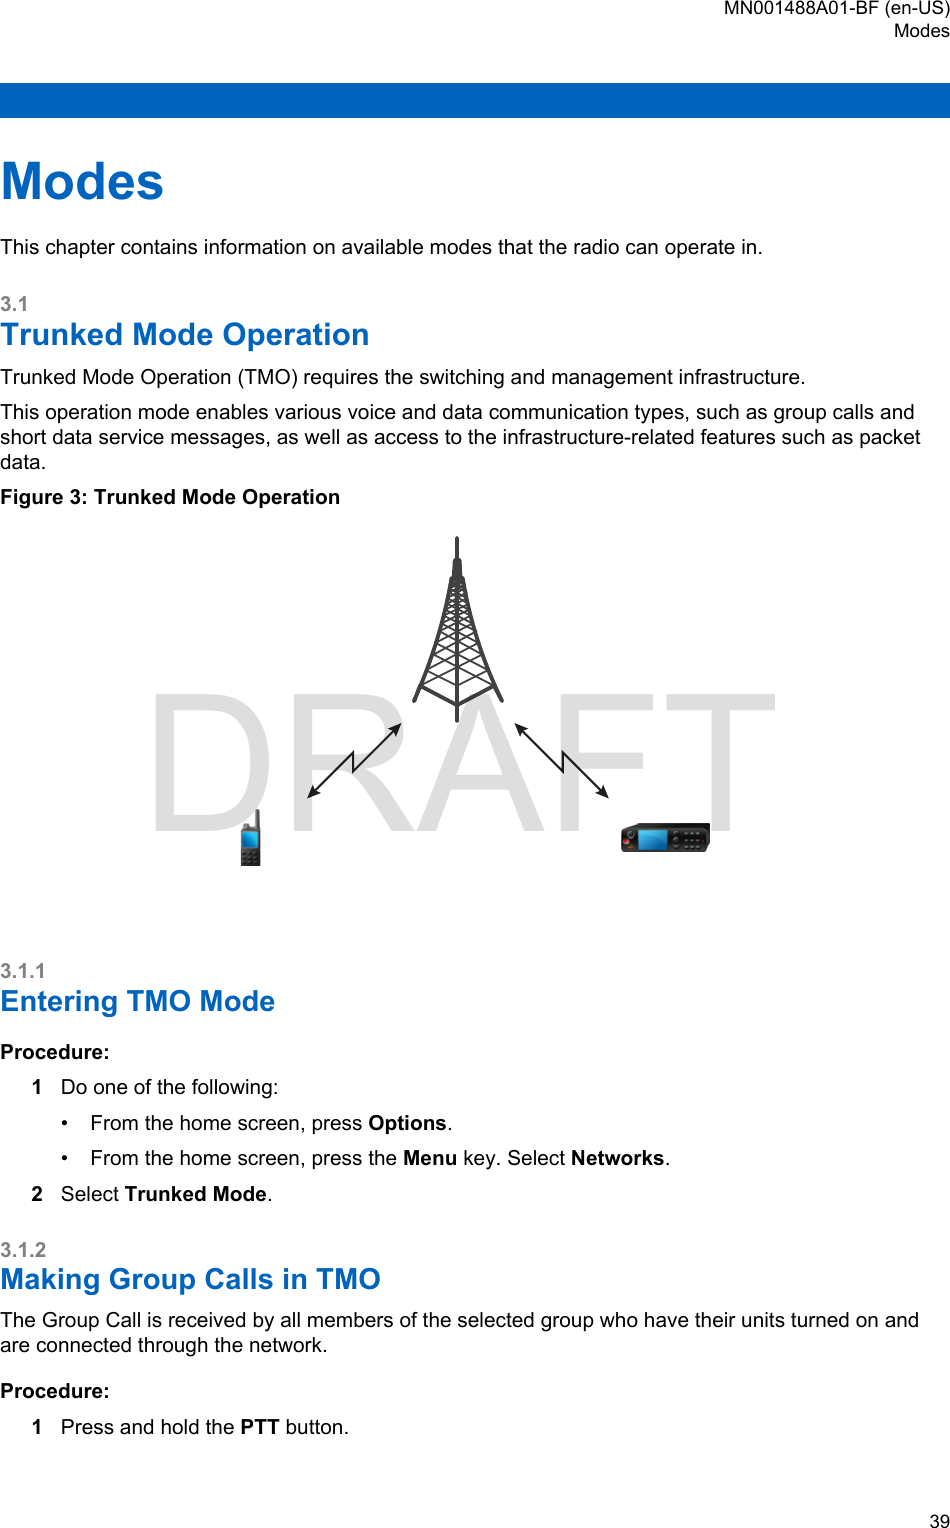 ModesThis chapter contains information on available modes that the radio can operate in.3.1Trunked Mode OperationTrunked Mode Operation (TMO) requires the switching and management infrastructure.This operation mode enables various voice and data communication types, such as group calls andshort data service messages, as well as access to the infrastructure-related features such as packetdata.Figure 3: Trunked Mode Operation3.1.1Entering TMO ModeProcedure:1Do one of the following:• From the home screen, press Options.• From the home screen, press the Menu key. Select Networks.2Select Trunked Mode.3.1.2Making Group Calls in TMOThe Group Call is received by all members of the selected group who have their units turned on andare connected through the network.Procedure:1Press and hold the PTT button.MN001488A01-BF (en-US)Modes  39DRAFT